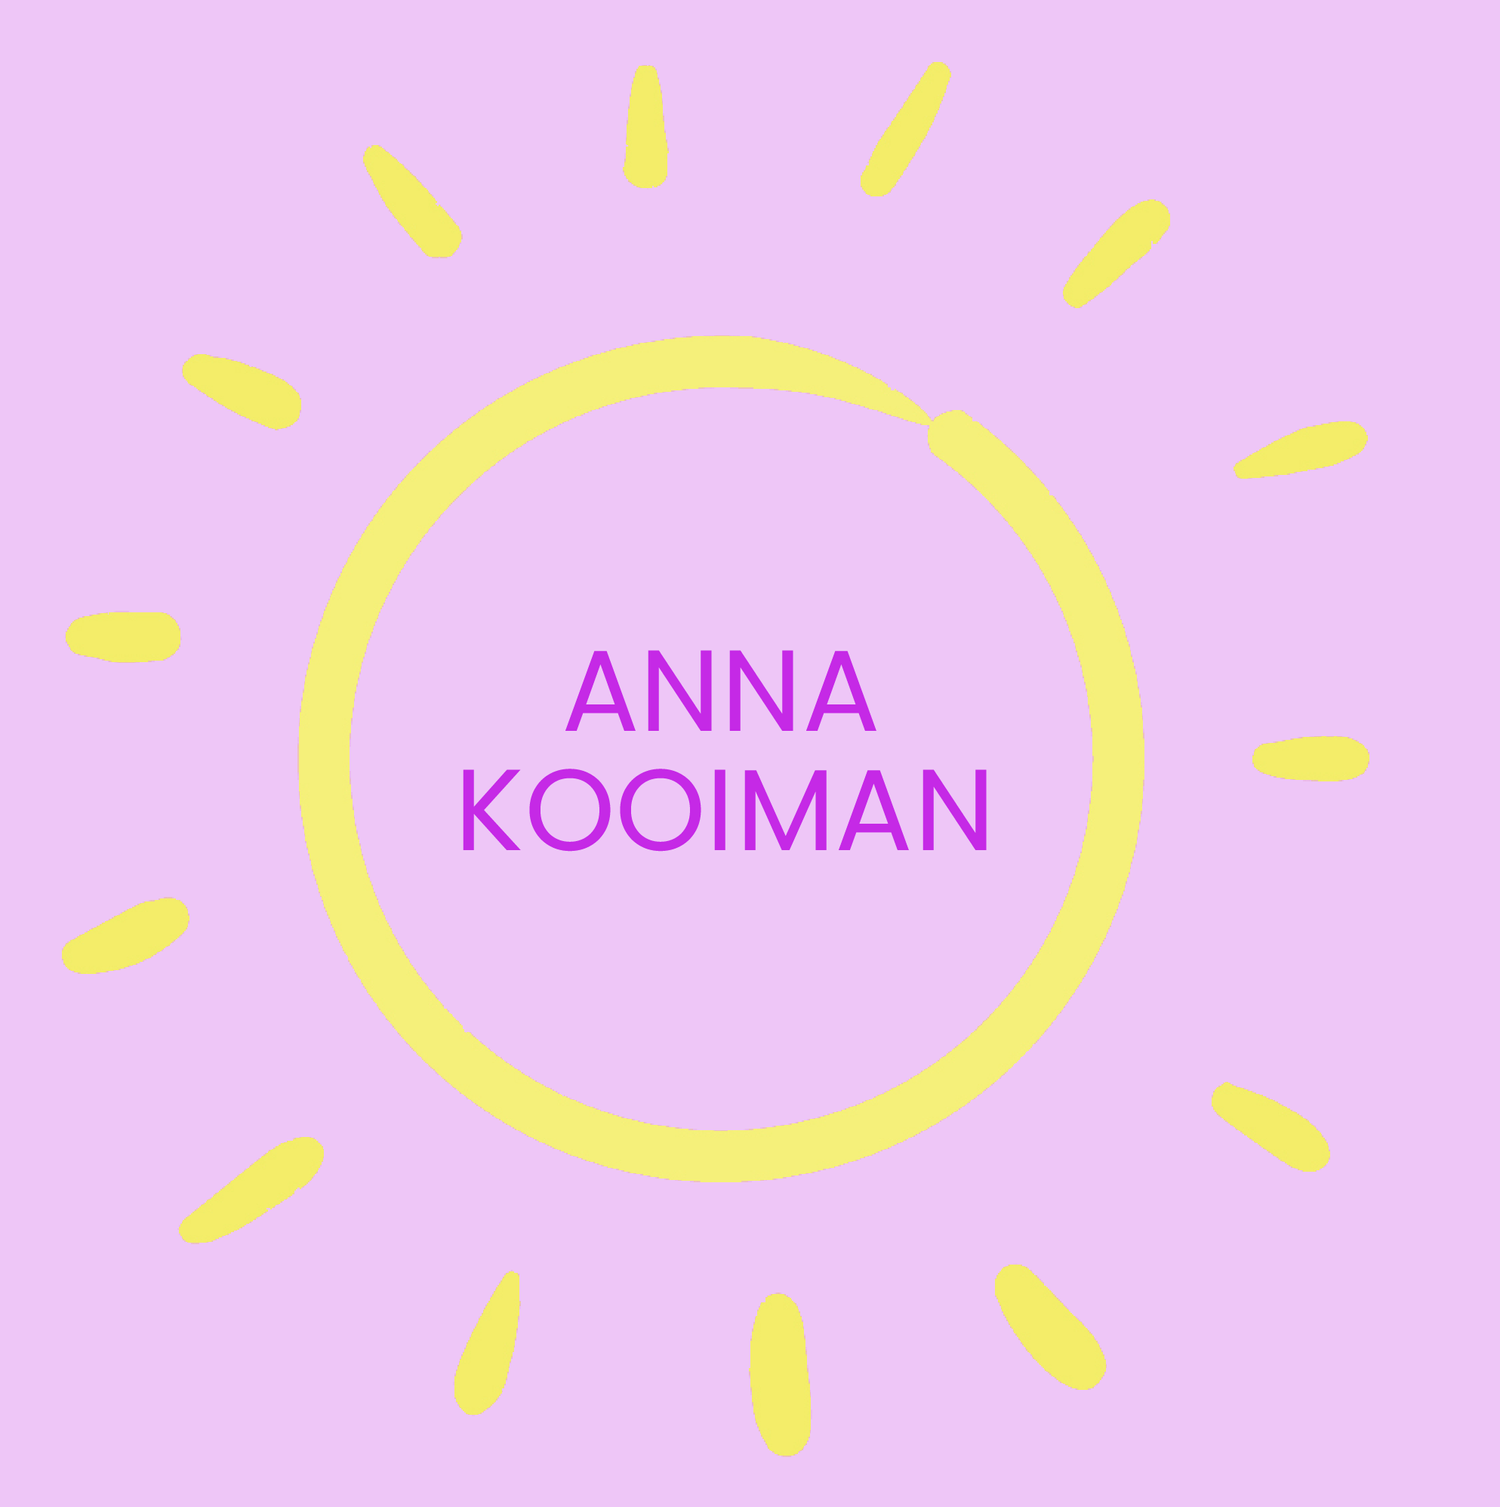 Anna Kooiman Active - App Fitness and Activewear for Moms